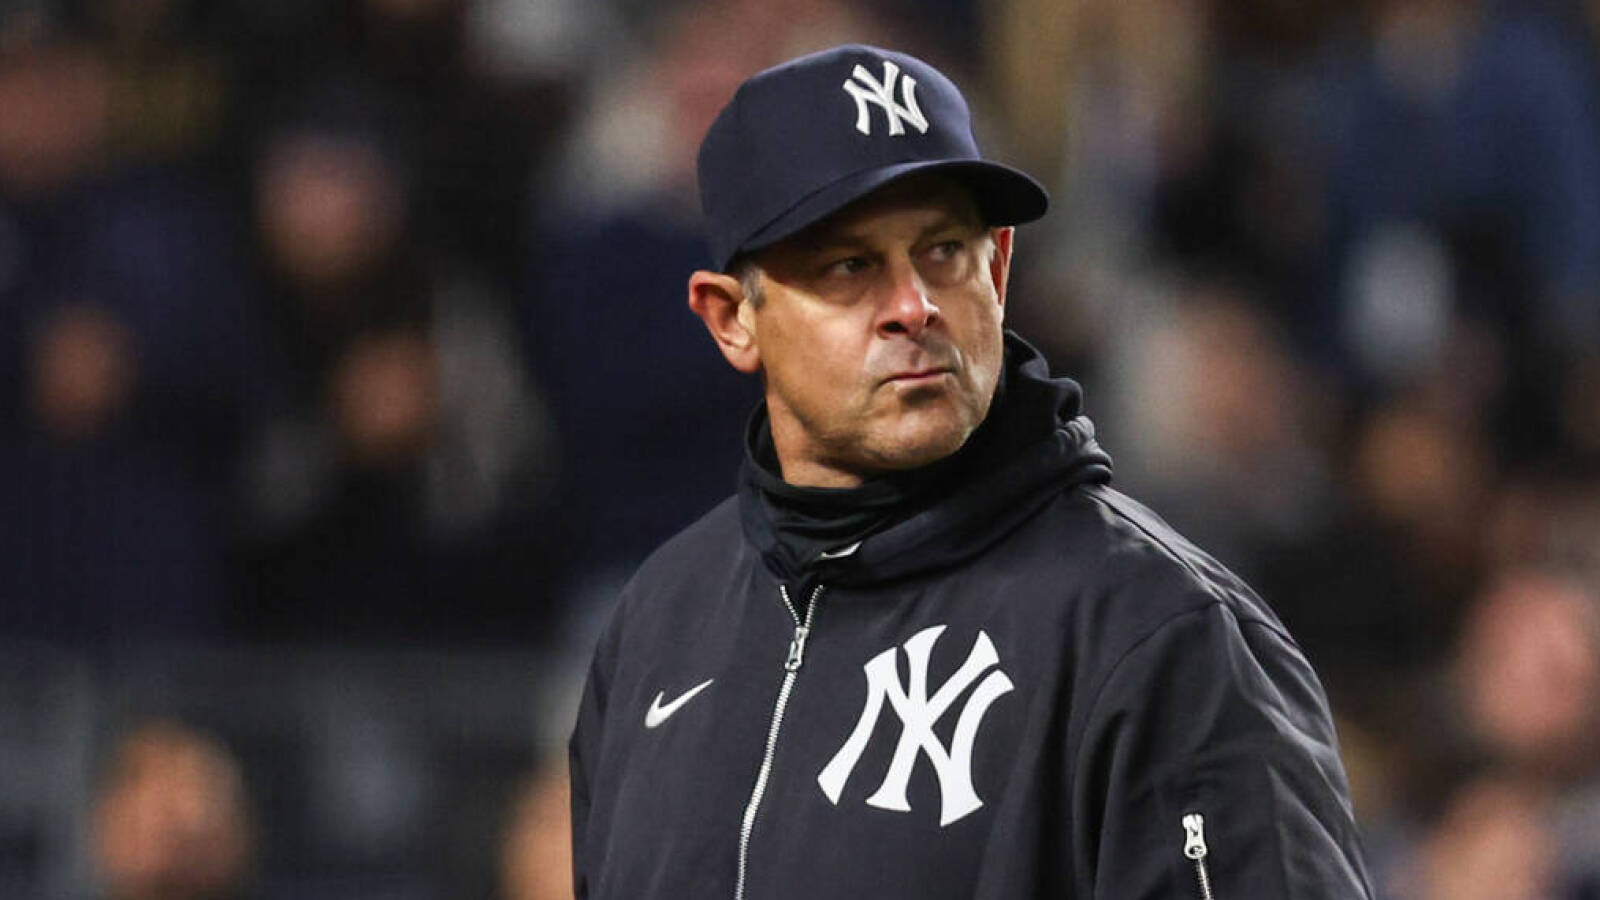 Aaron Boone comes to the defense of retired umpire Angel Hernandez